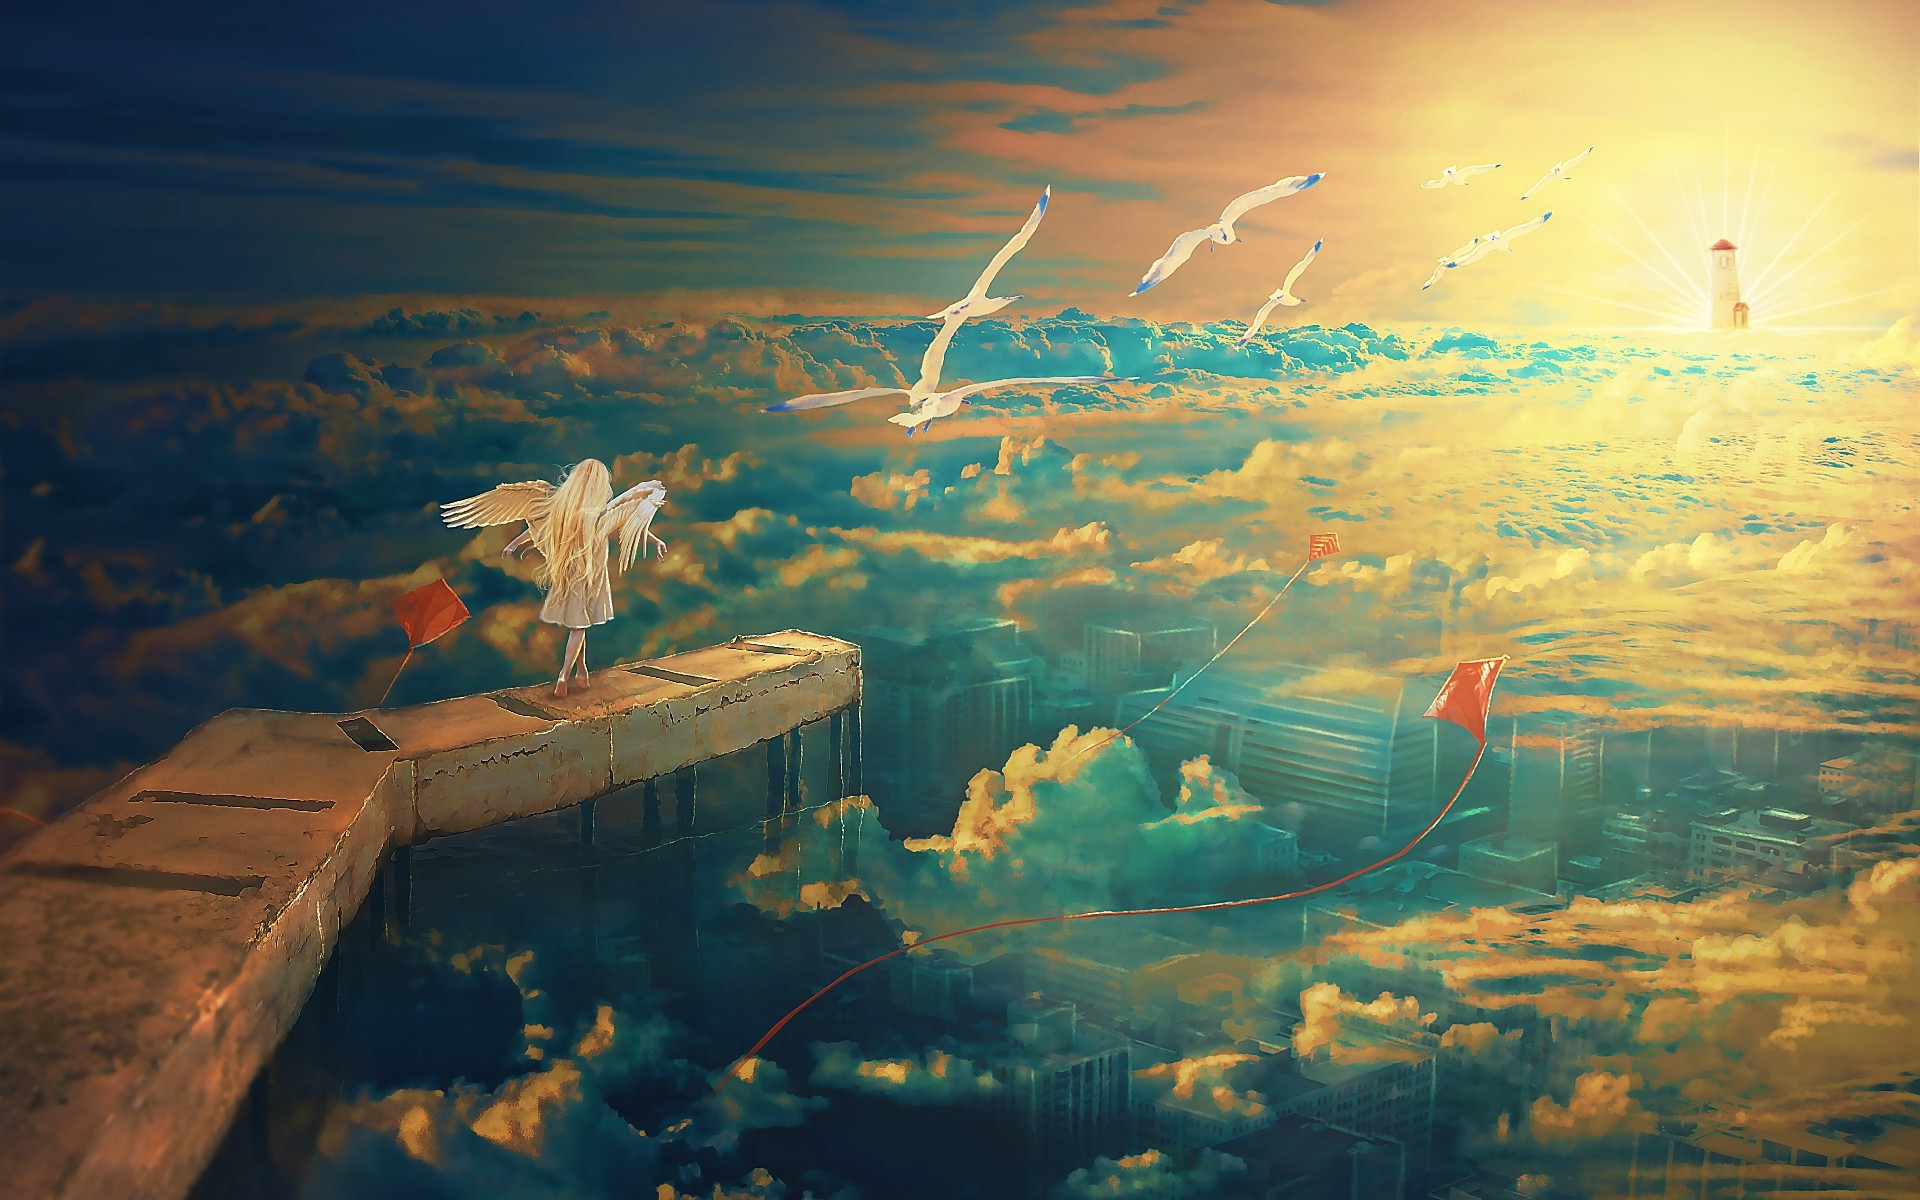 anime, Fantasy Art, Seagulls, Kites, Wings, Clouds, City, Lighthouse